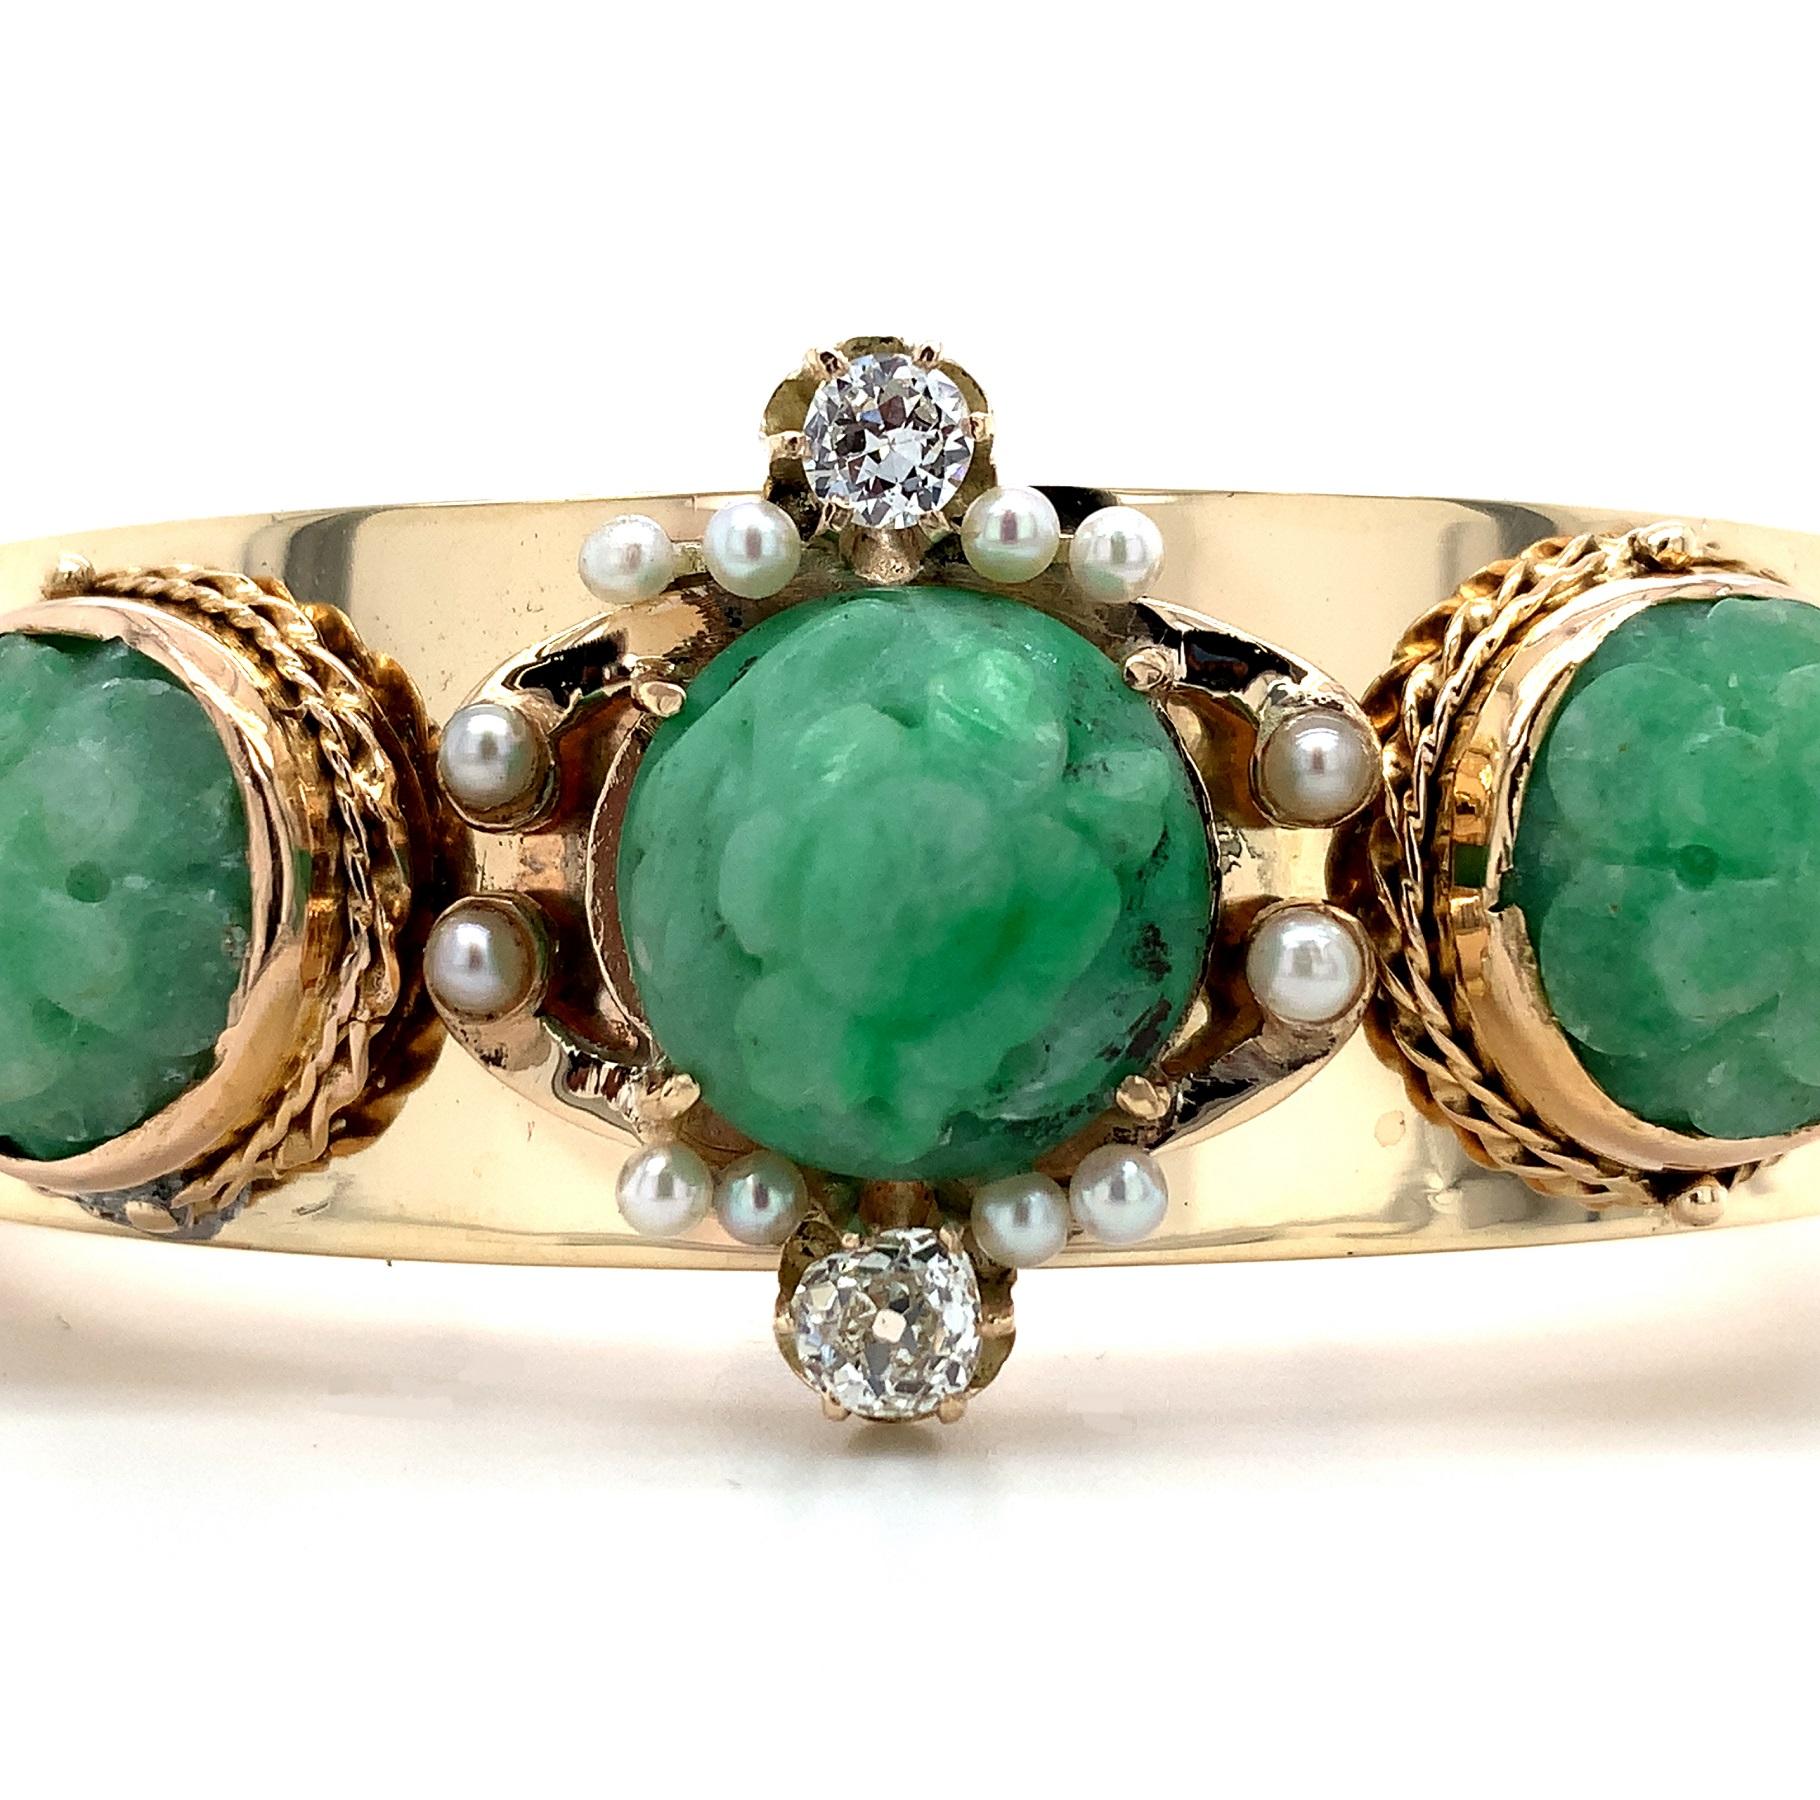 14K yellow gold solid heavy bangle bracelet with applied jade, diamonds, and pearls. The bangle bracelet interior measures 2 1/4